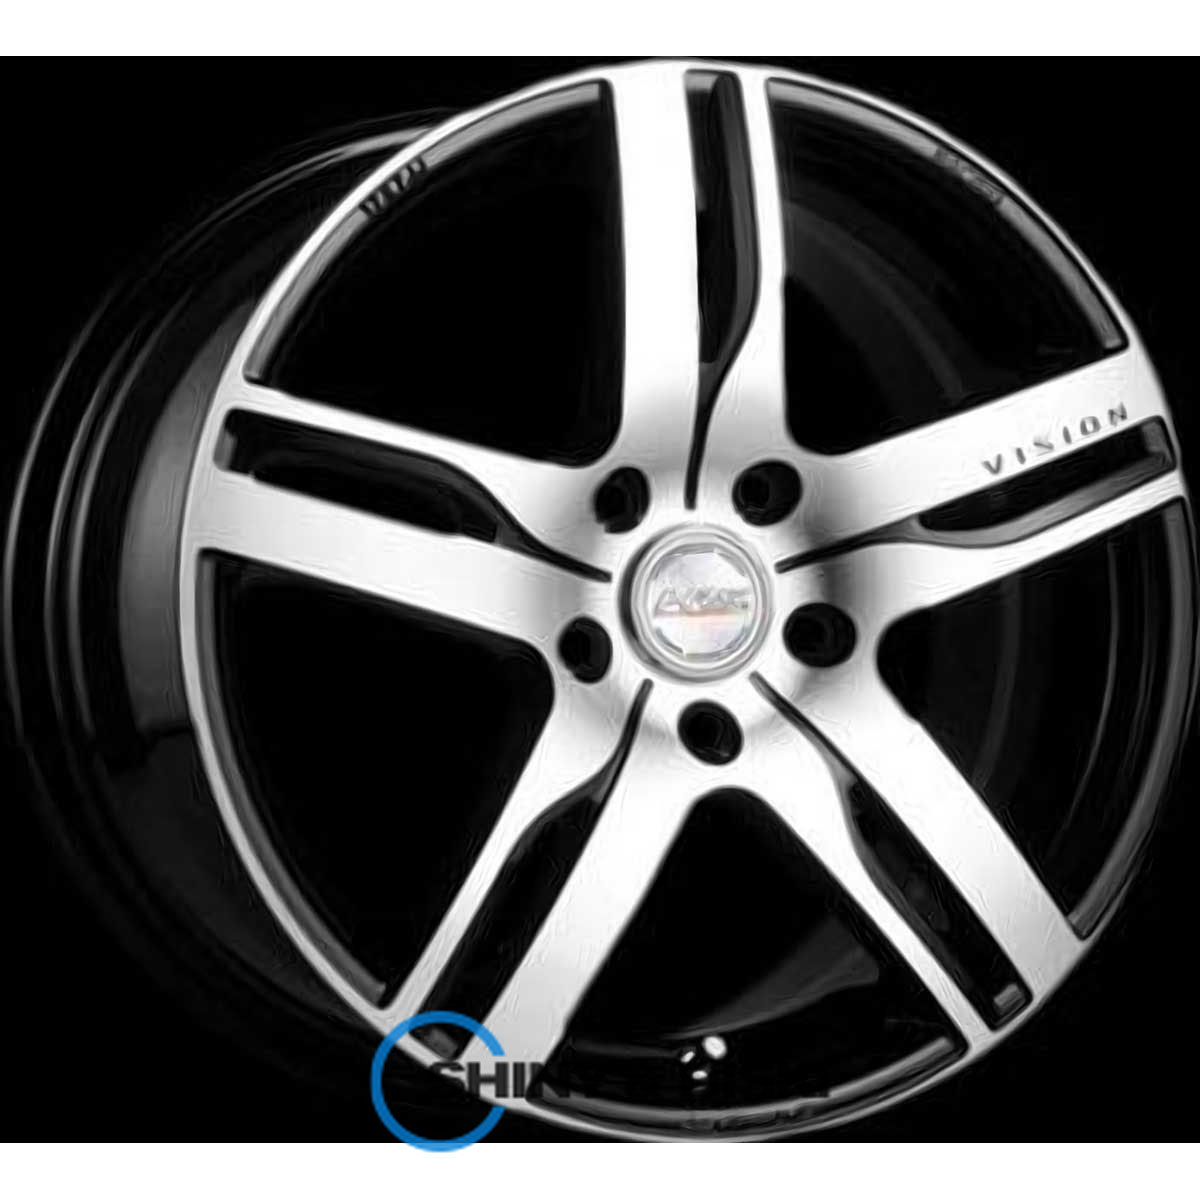 rs tuning h-459 bkfp r15 w6.5 pcd4x114.3 et40 dia67.1